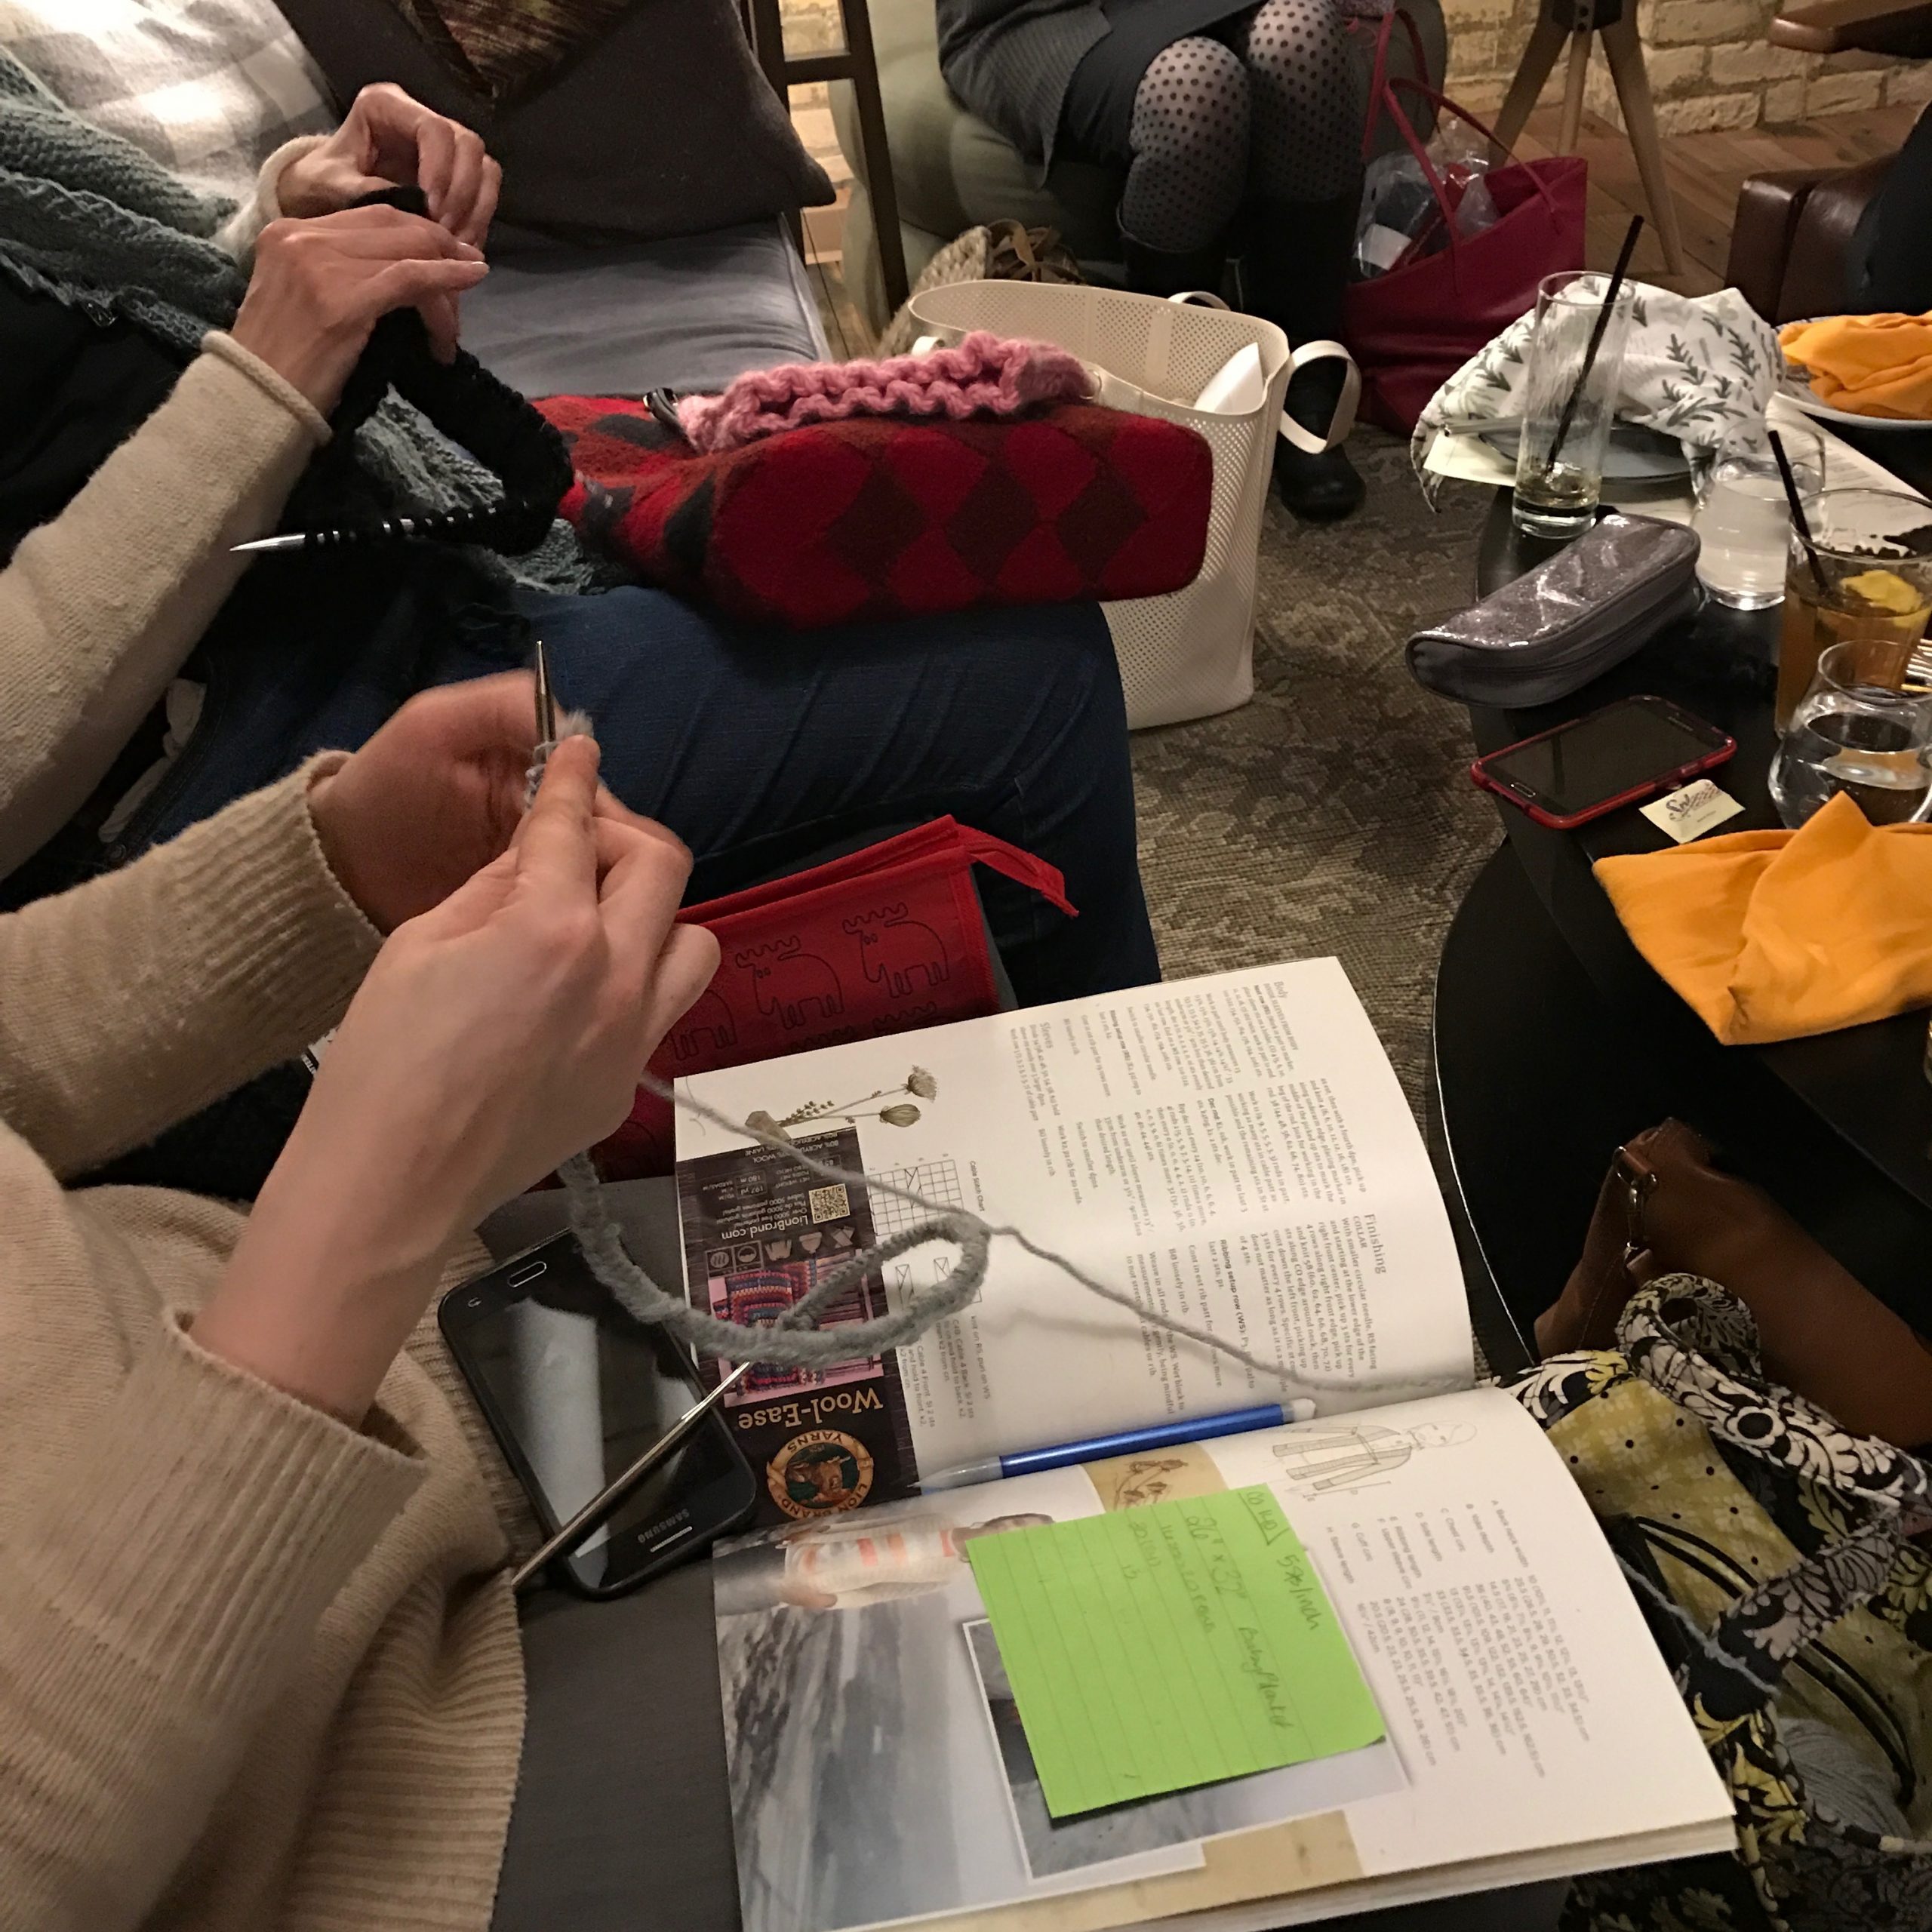 A group of woman knitting, the image only shows their laps and hands.